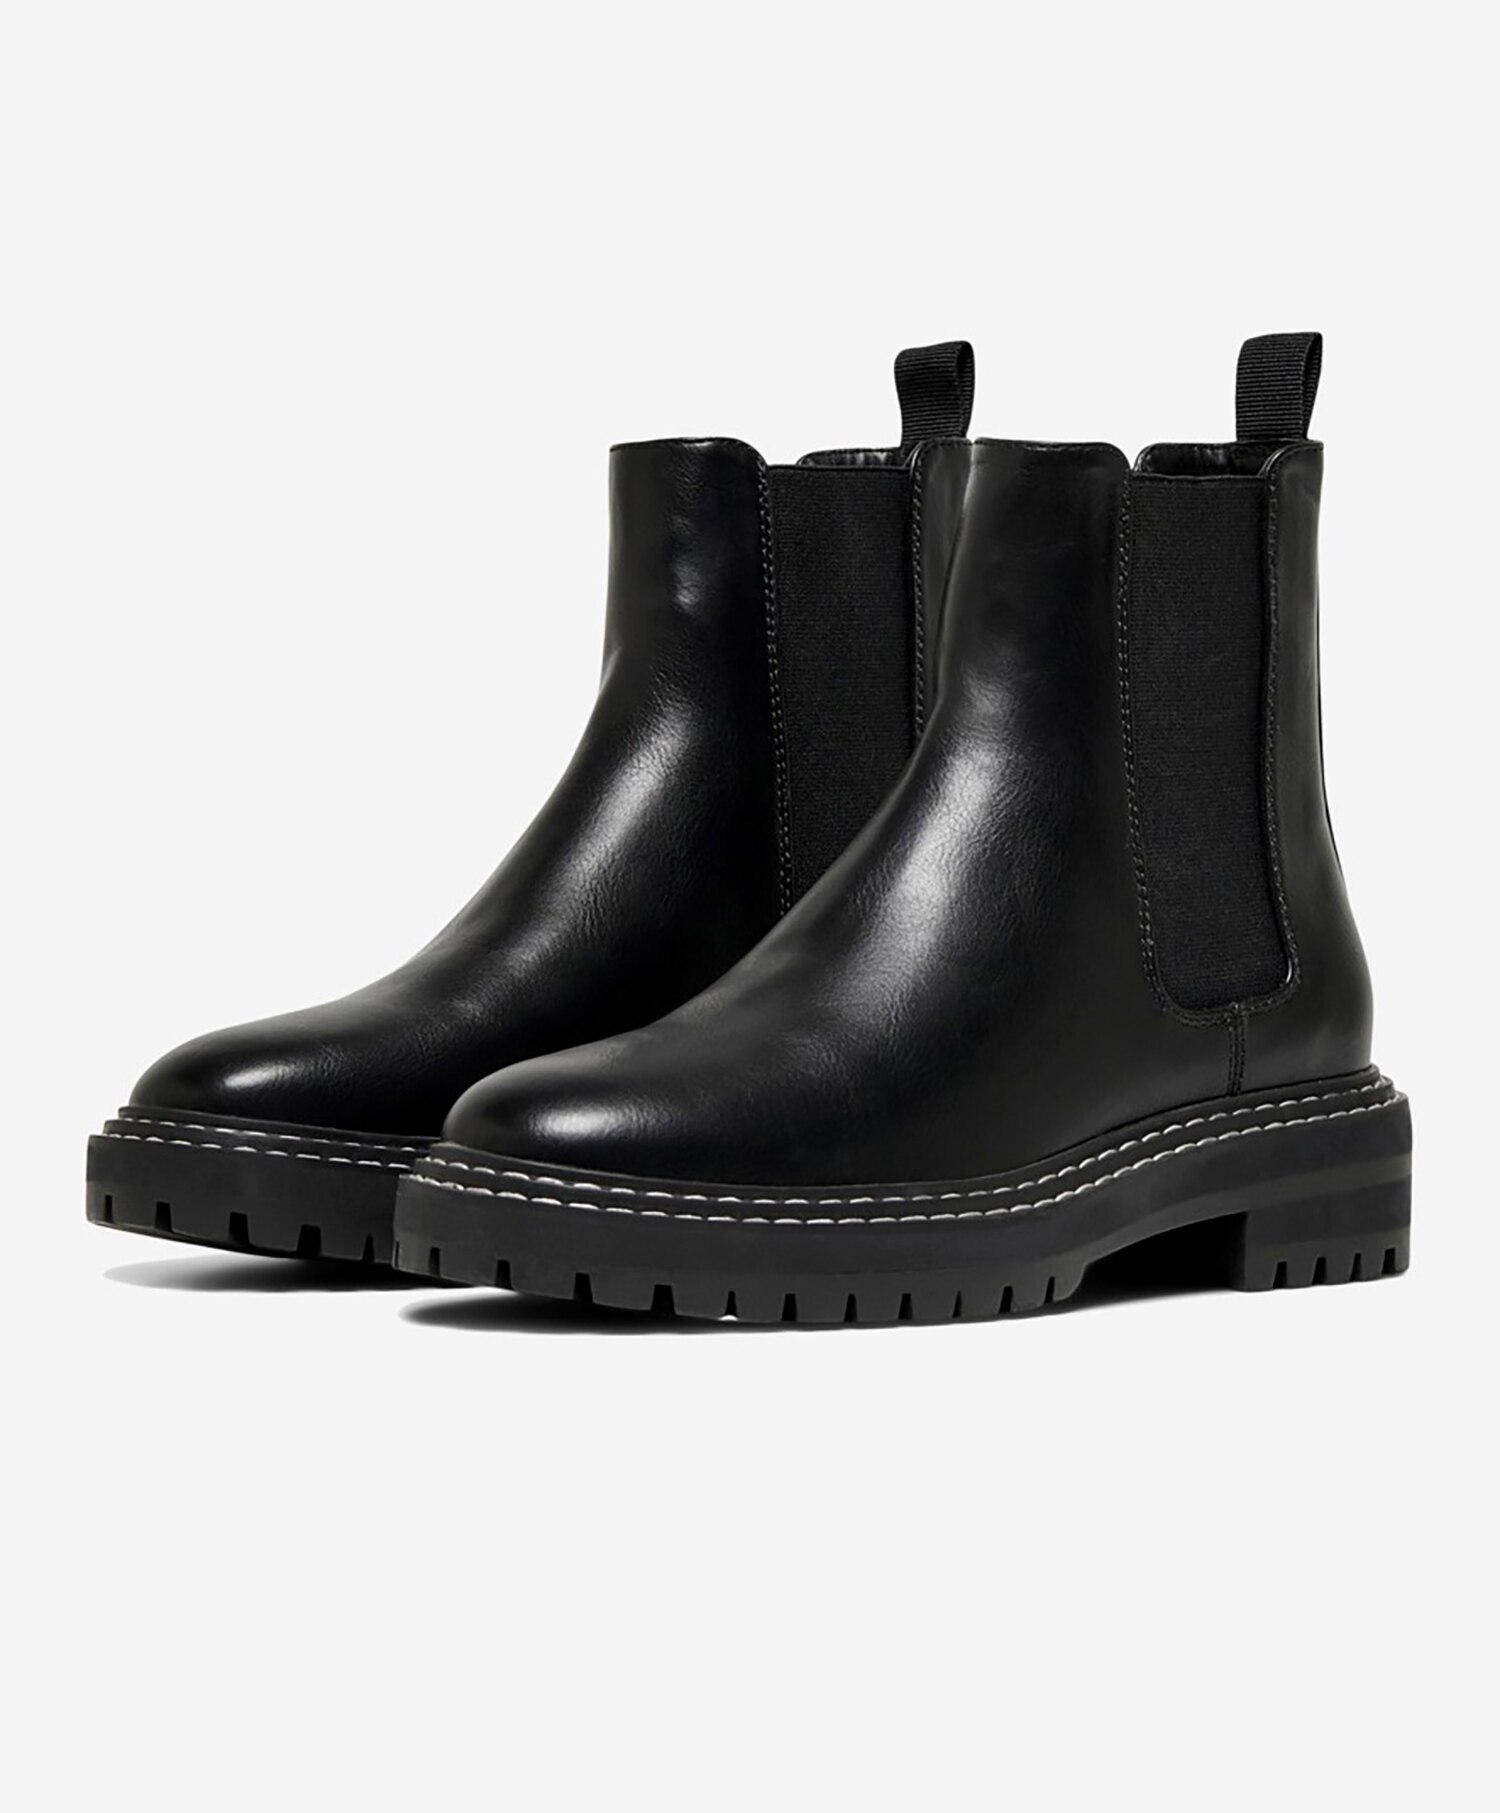 Only Chelsea boot